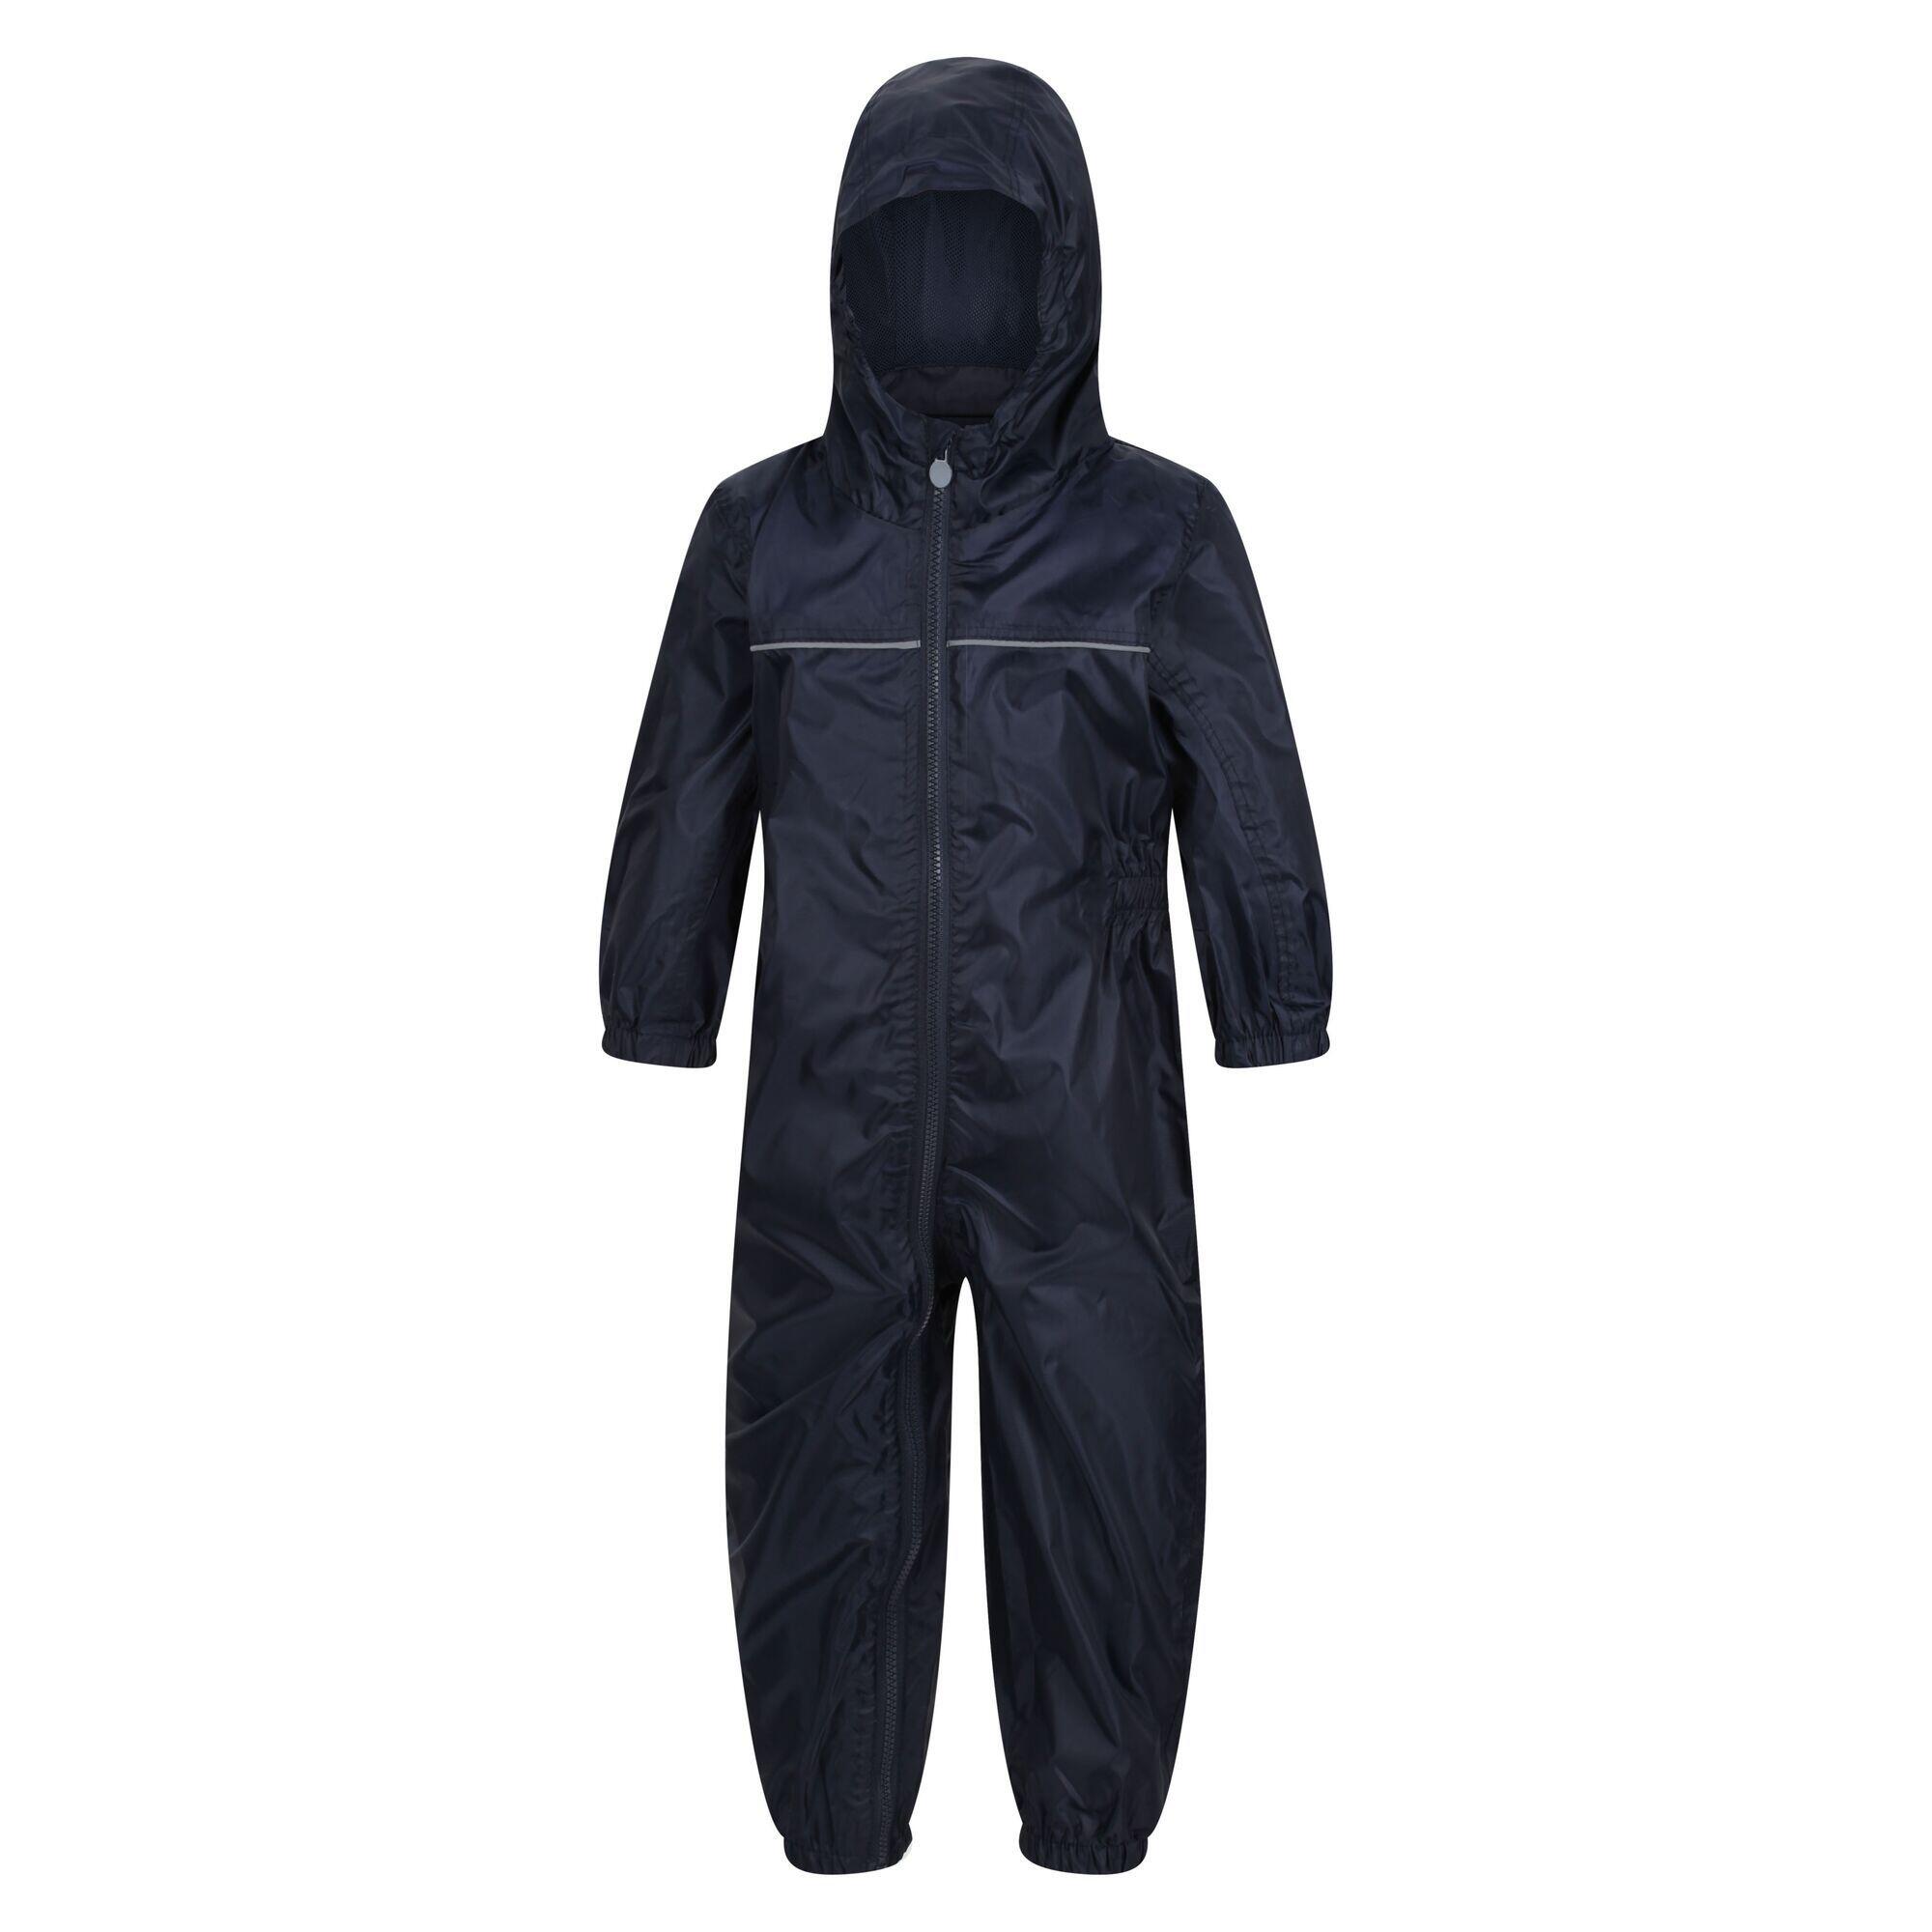 REGATTA Professional Baby/Kids Paddle All In One Rain Suit (Navy)